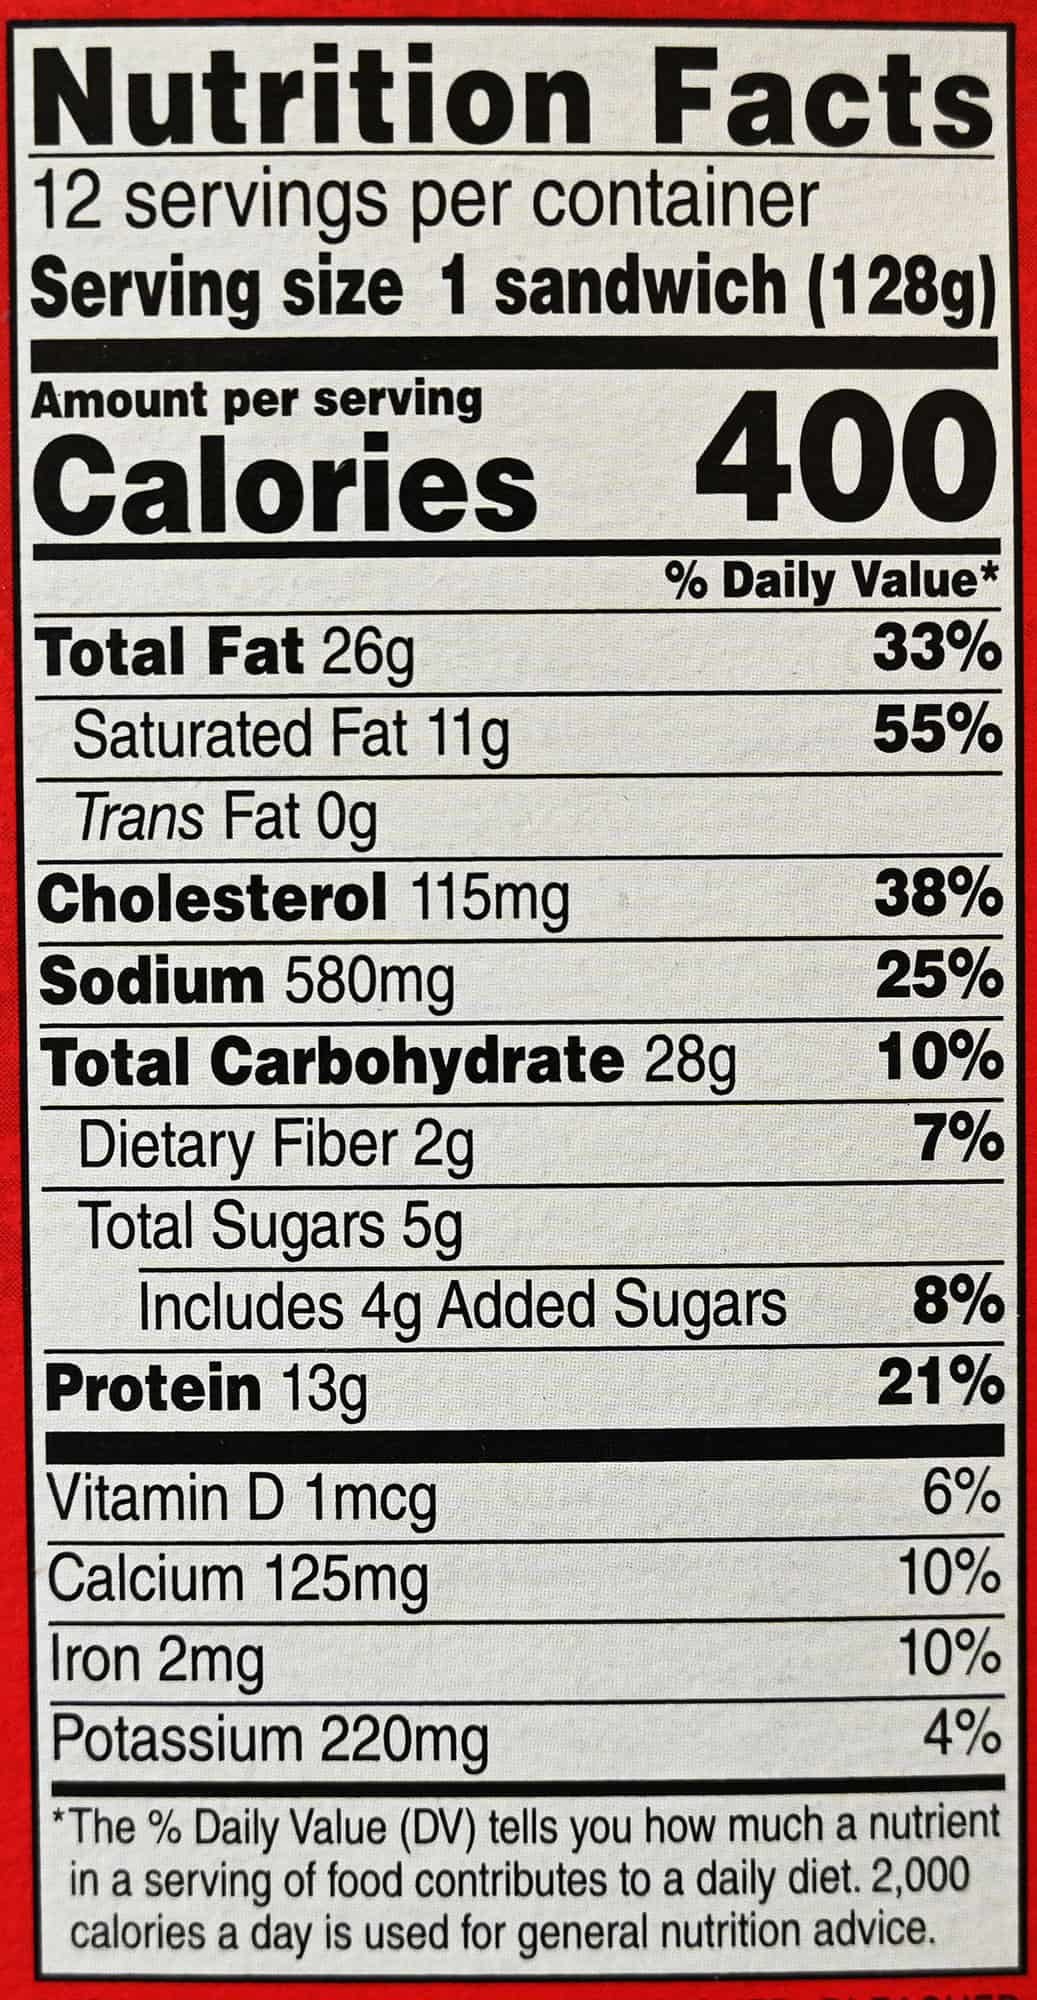 Image of the nutrition facts for the croissant sandwiches from the back of the box.